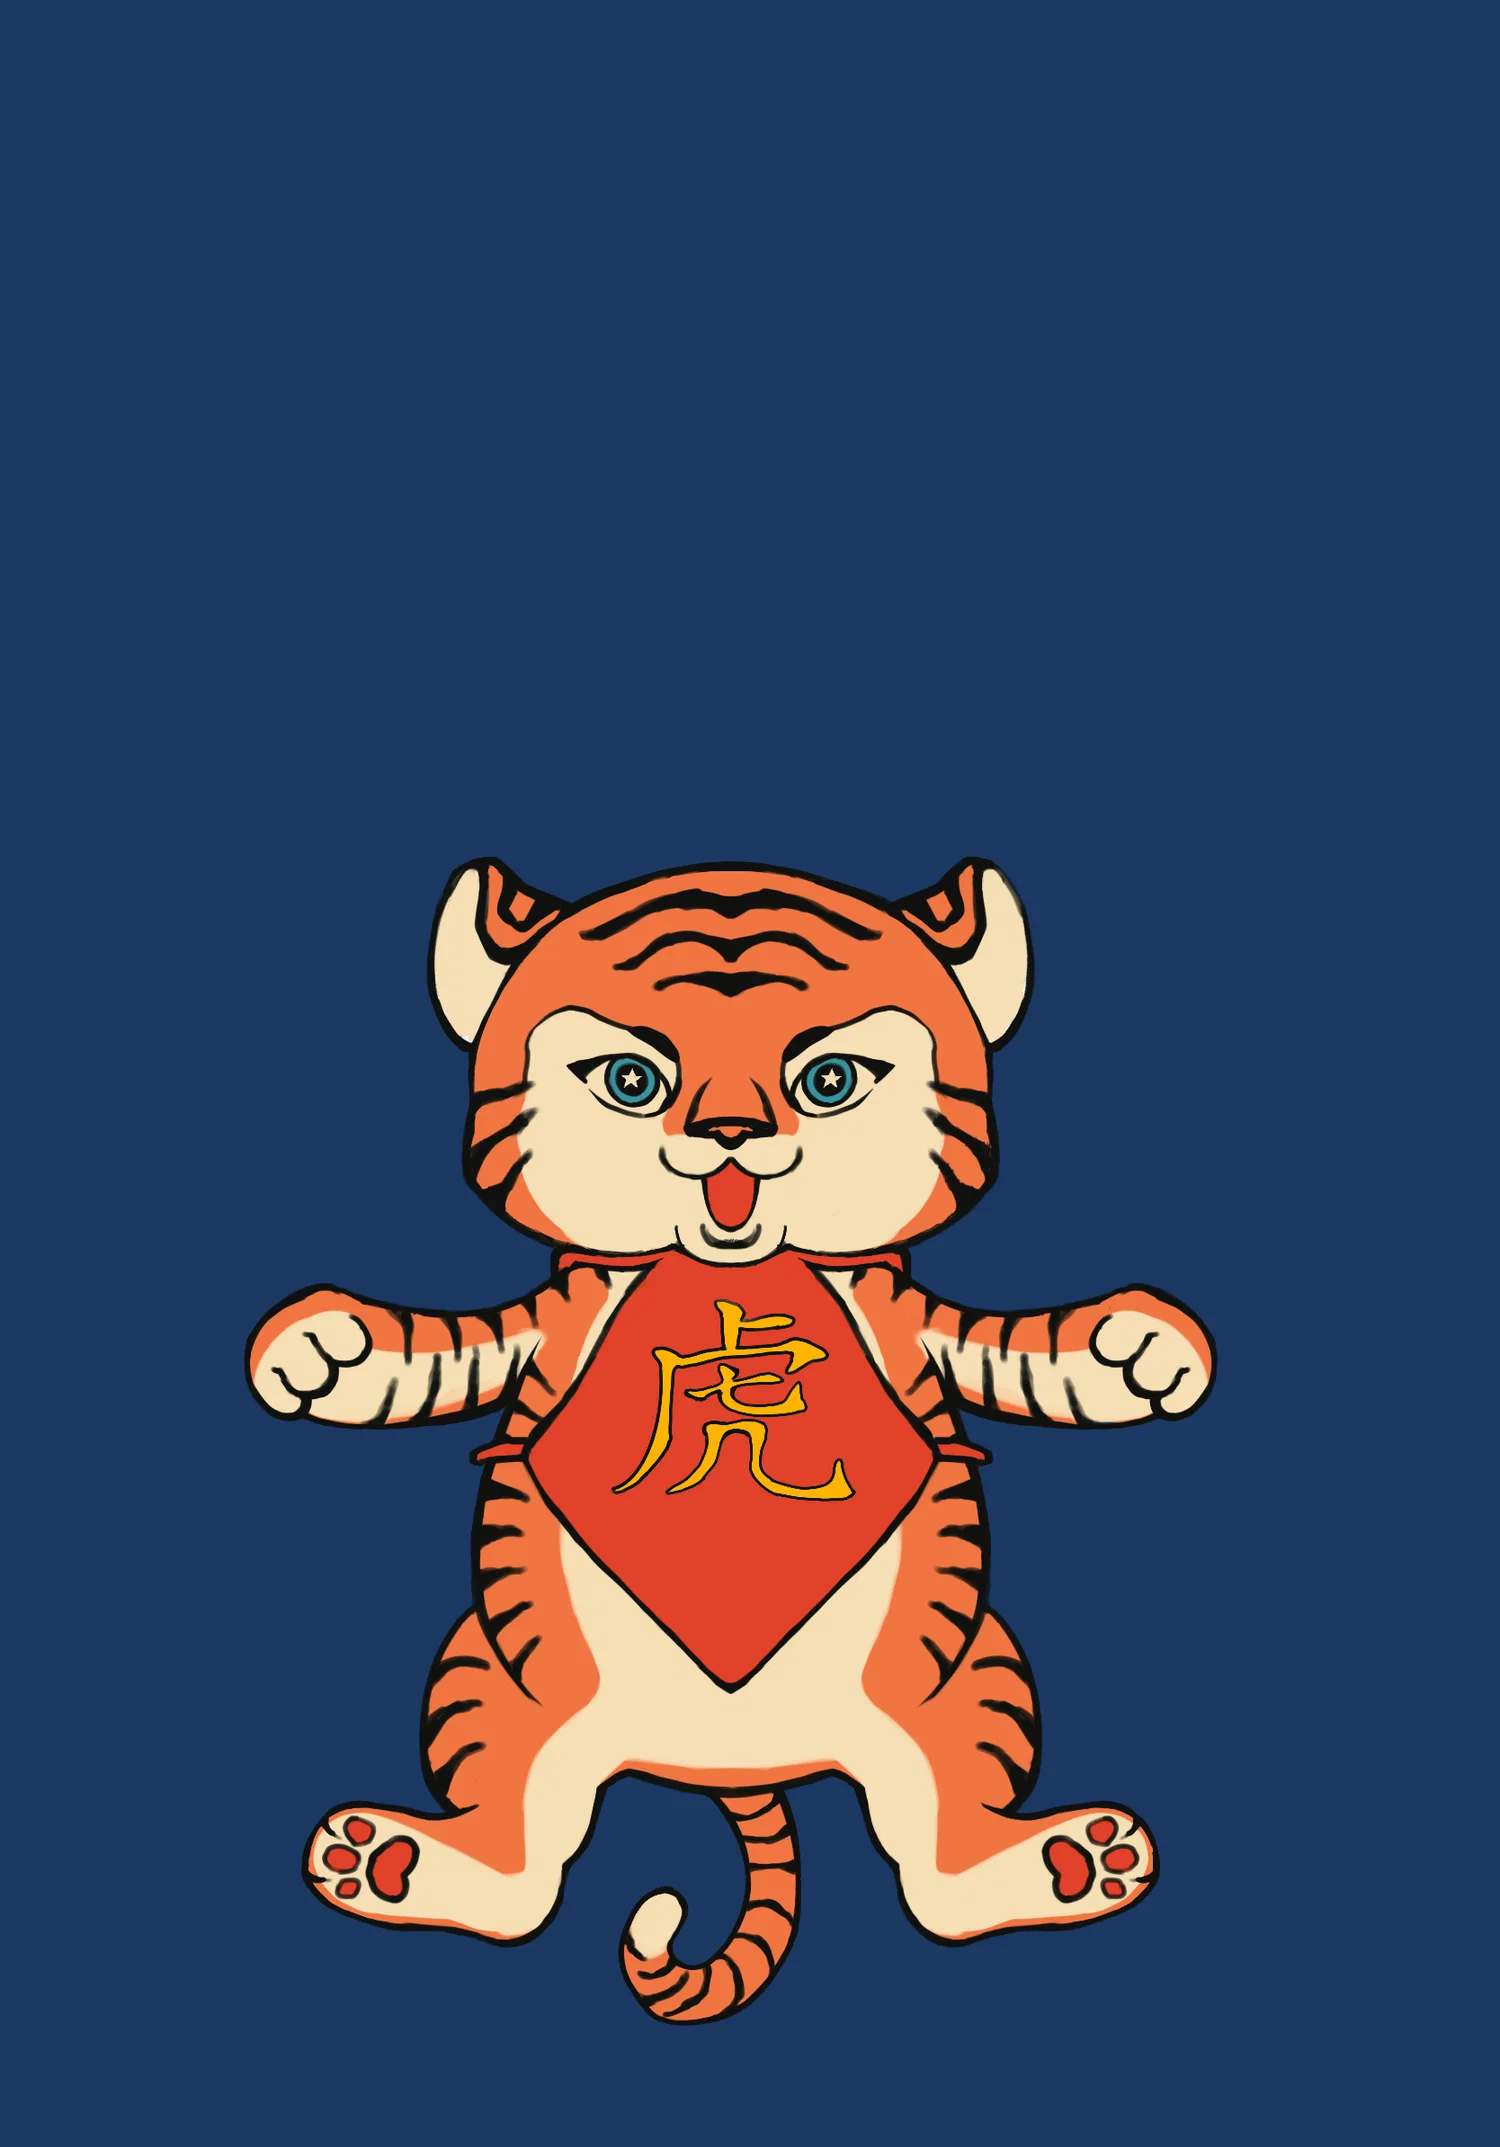 Done for Year of the Tiger